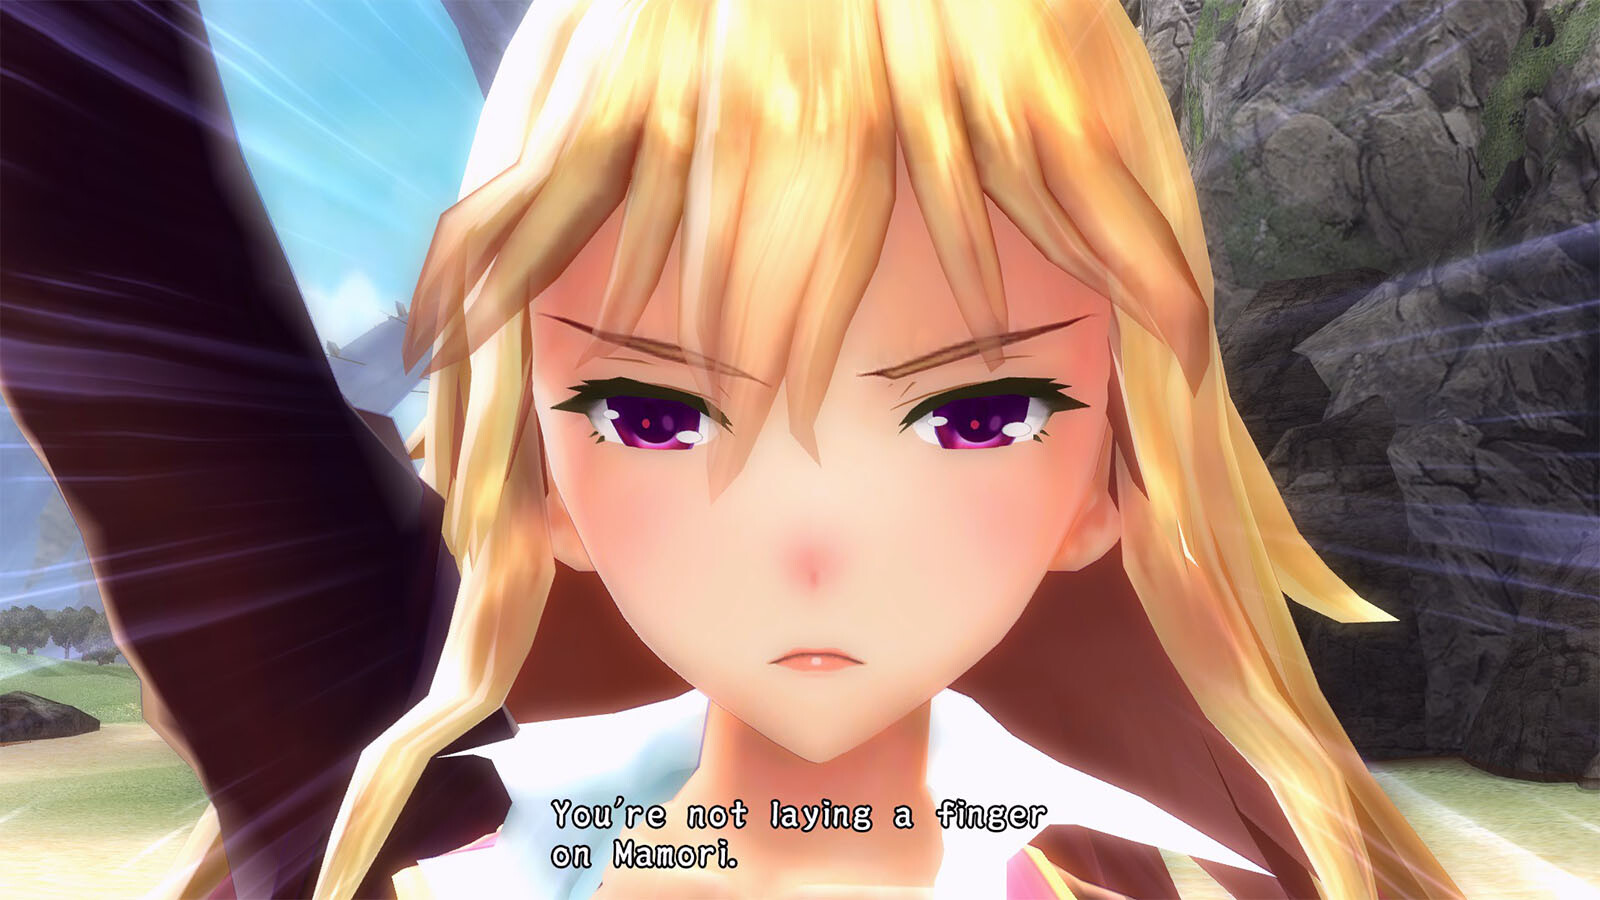 VALKYRIE DRIVE Complete Edition Steam Key for PC - Buy now